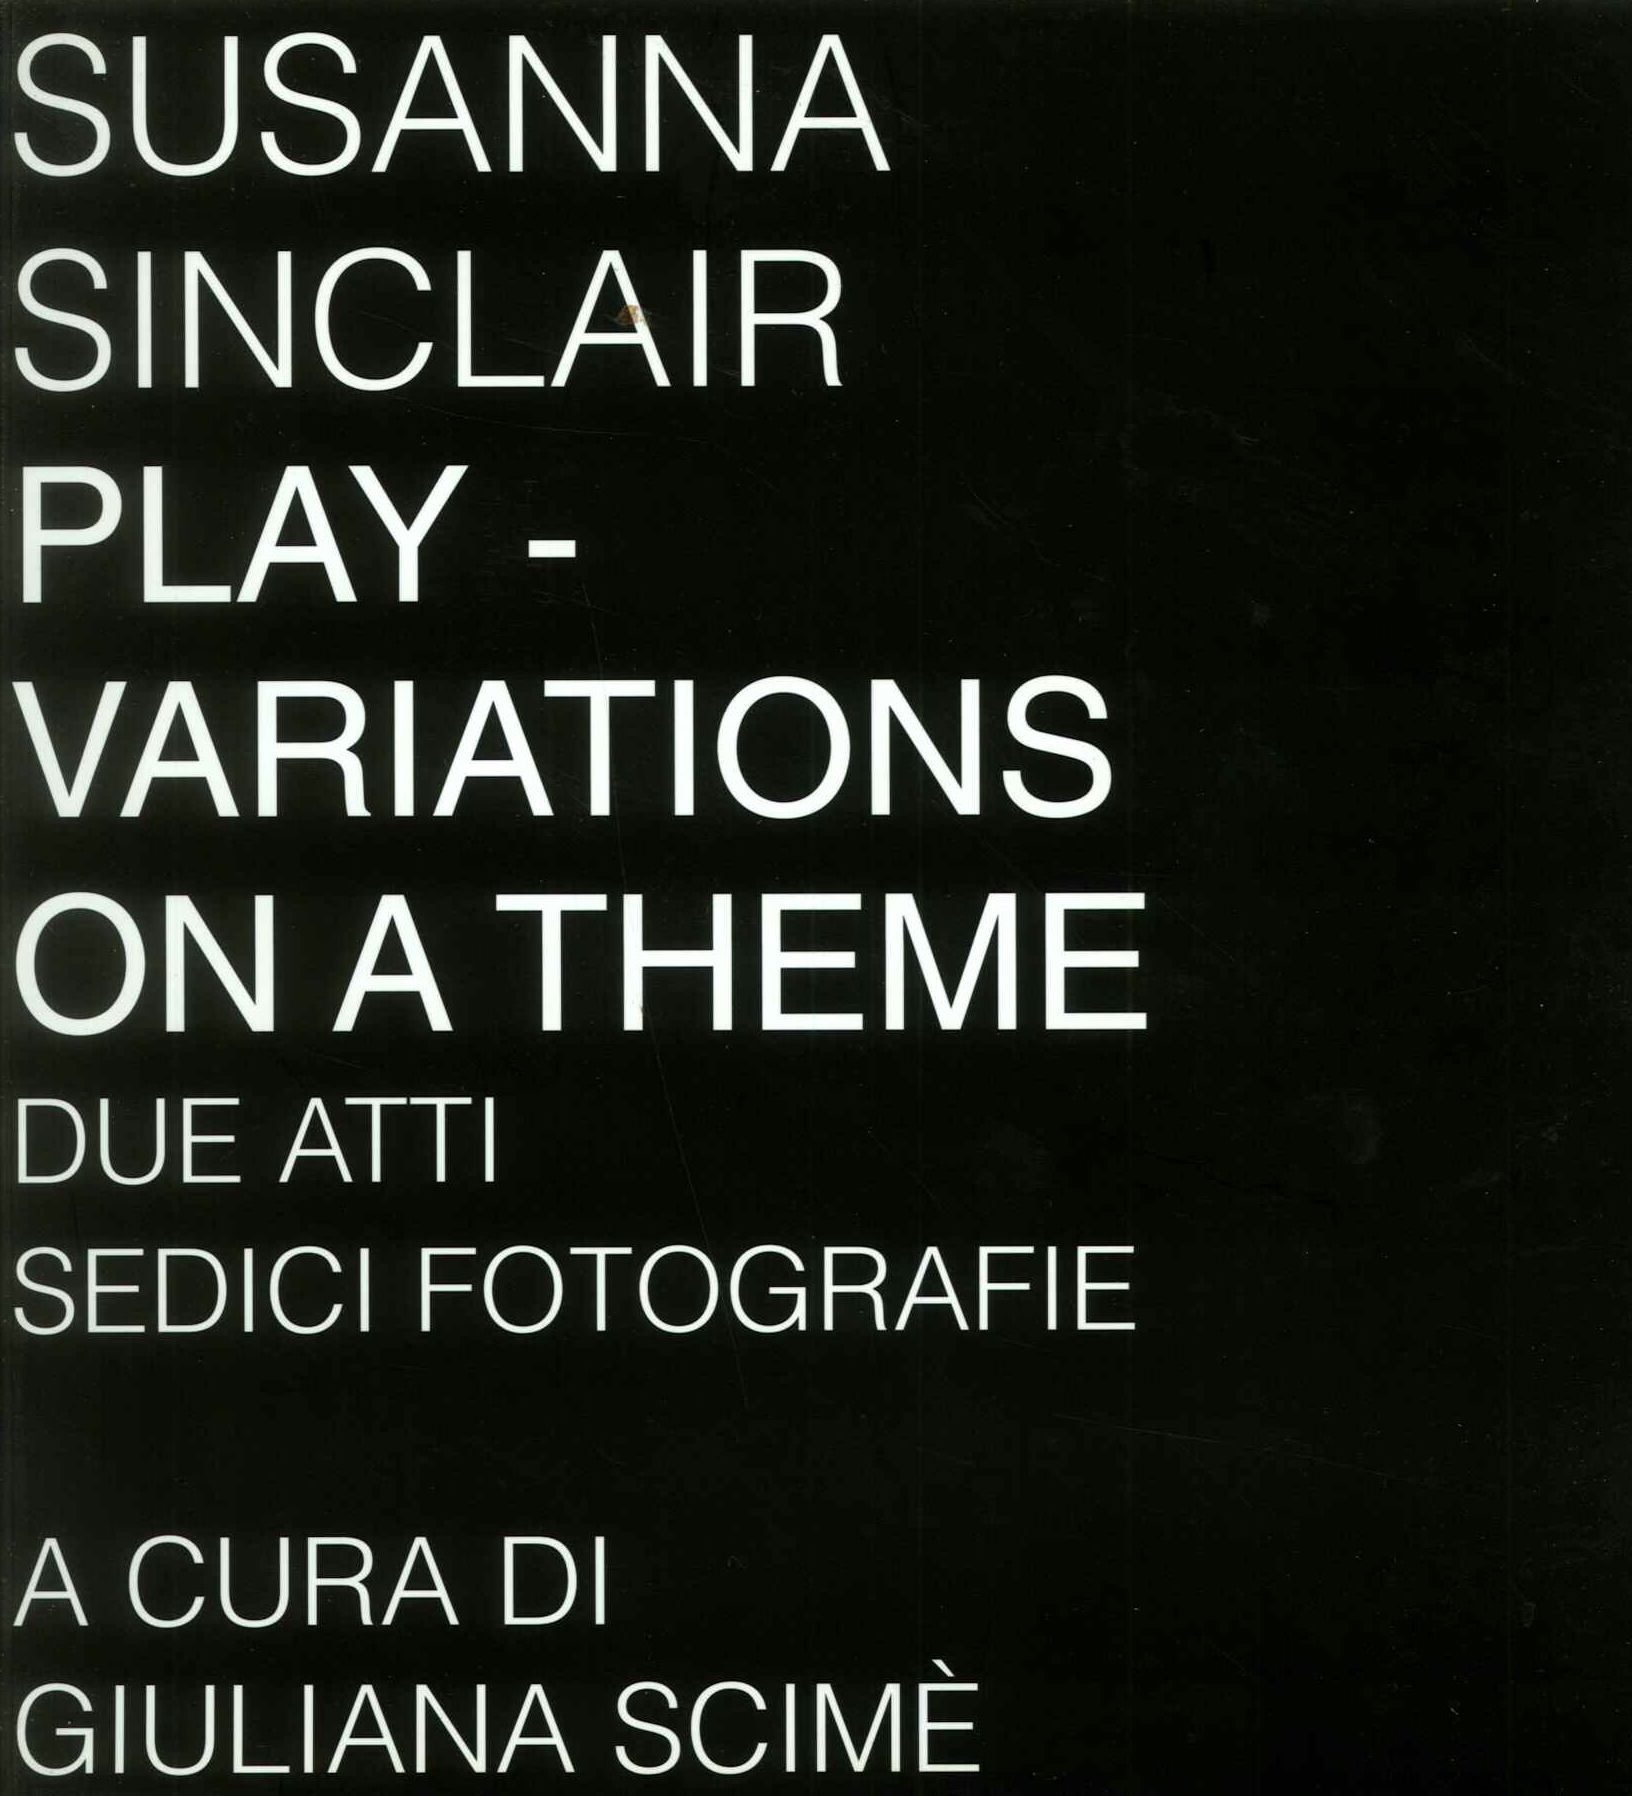 PlayVariations on a Theme  due atti sedici fotografie